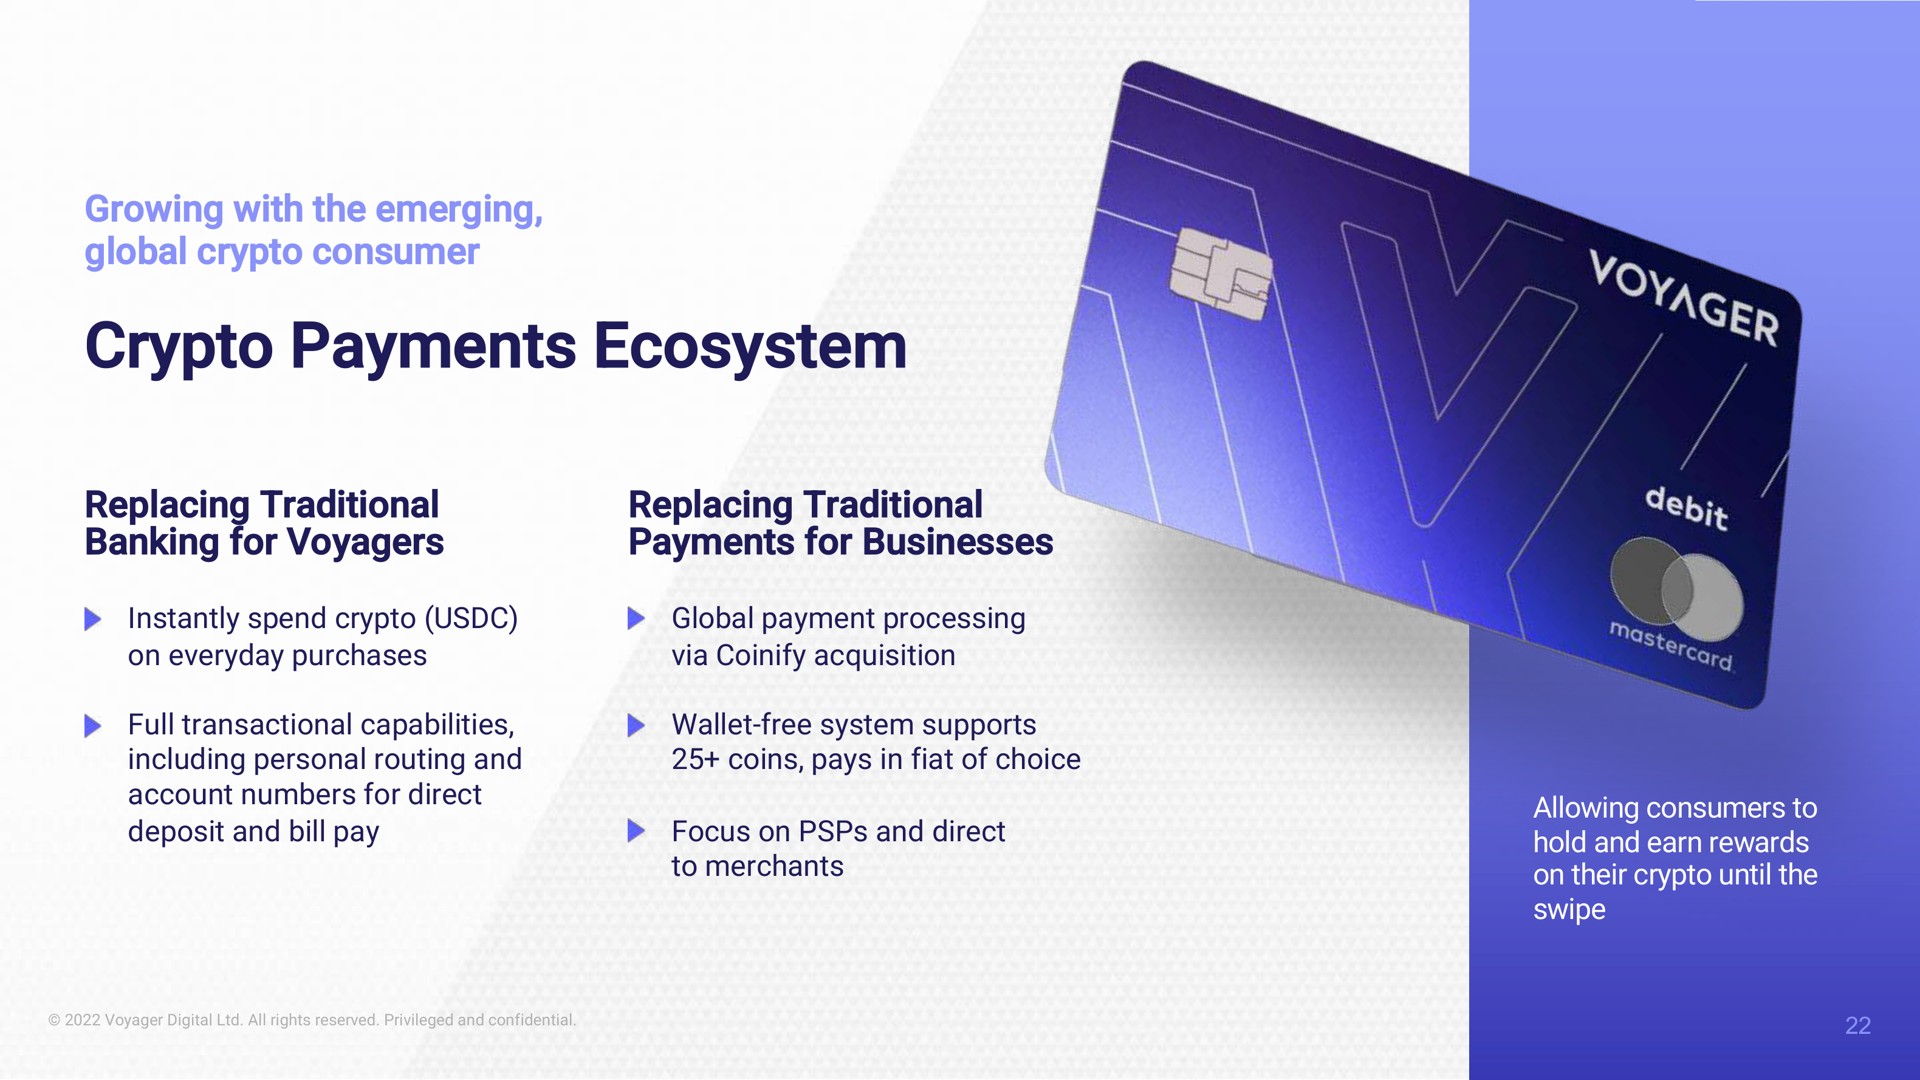 payments ecosystem | Voyager Digital